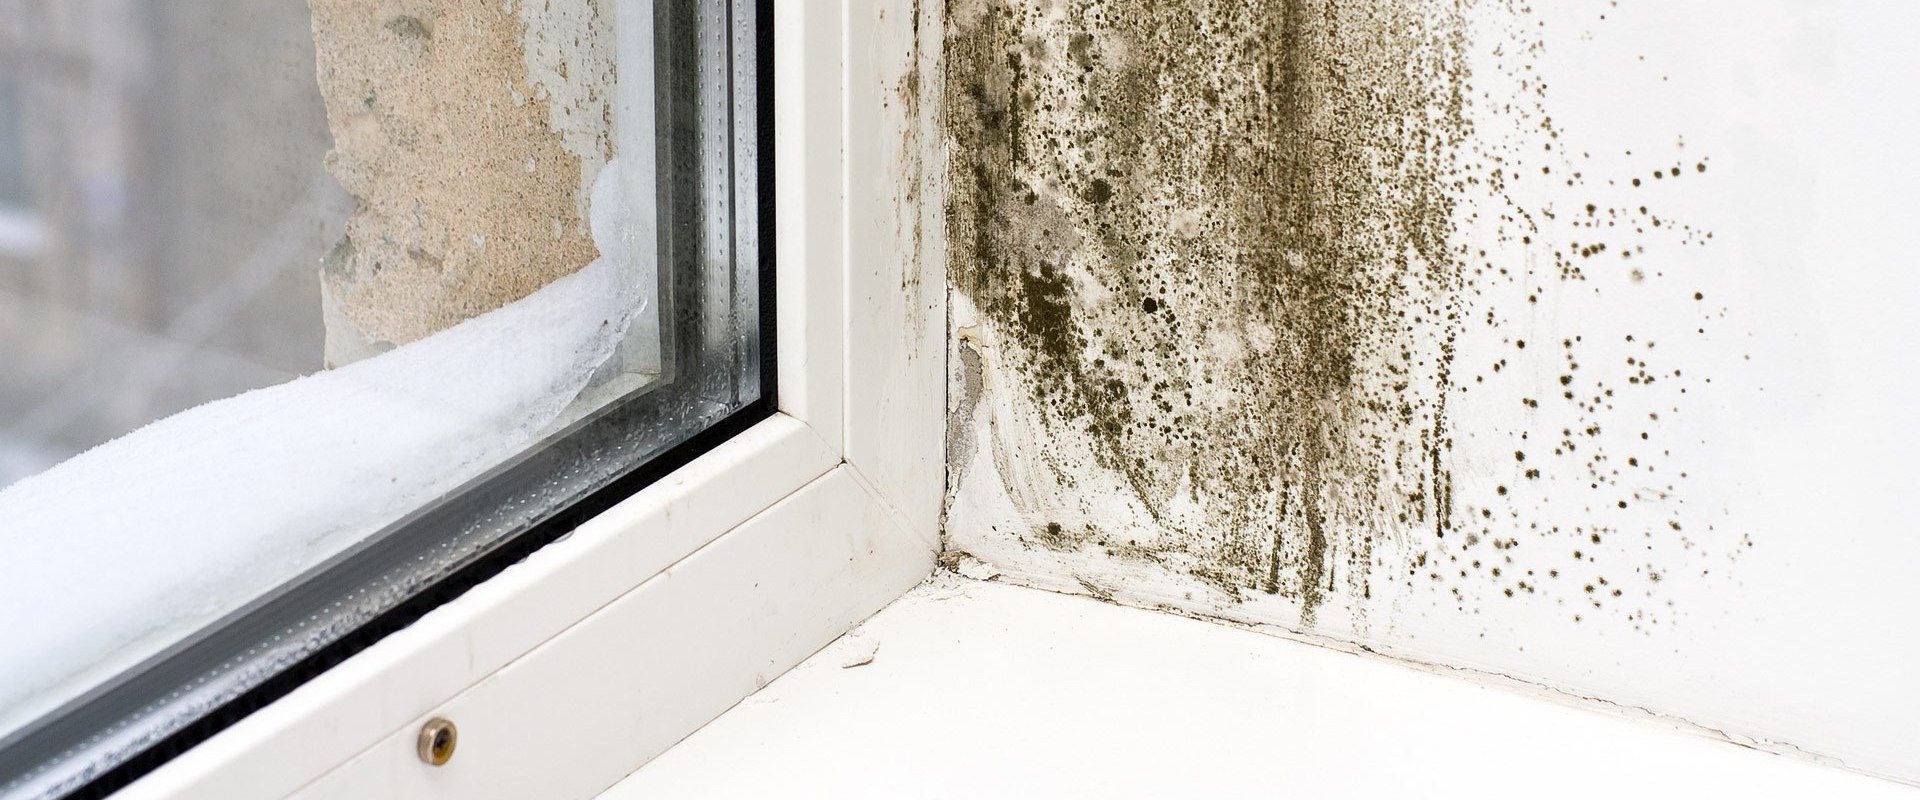 How does regular house cleaning reduce mold and mildew in my home?